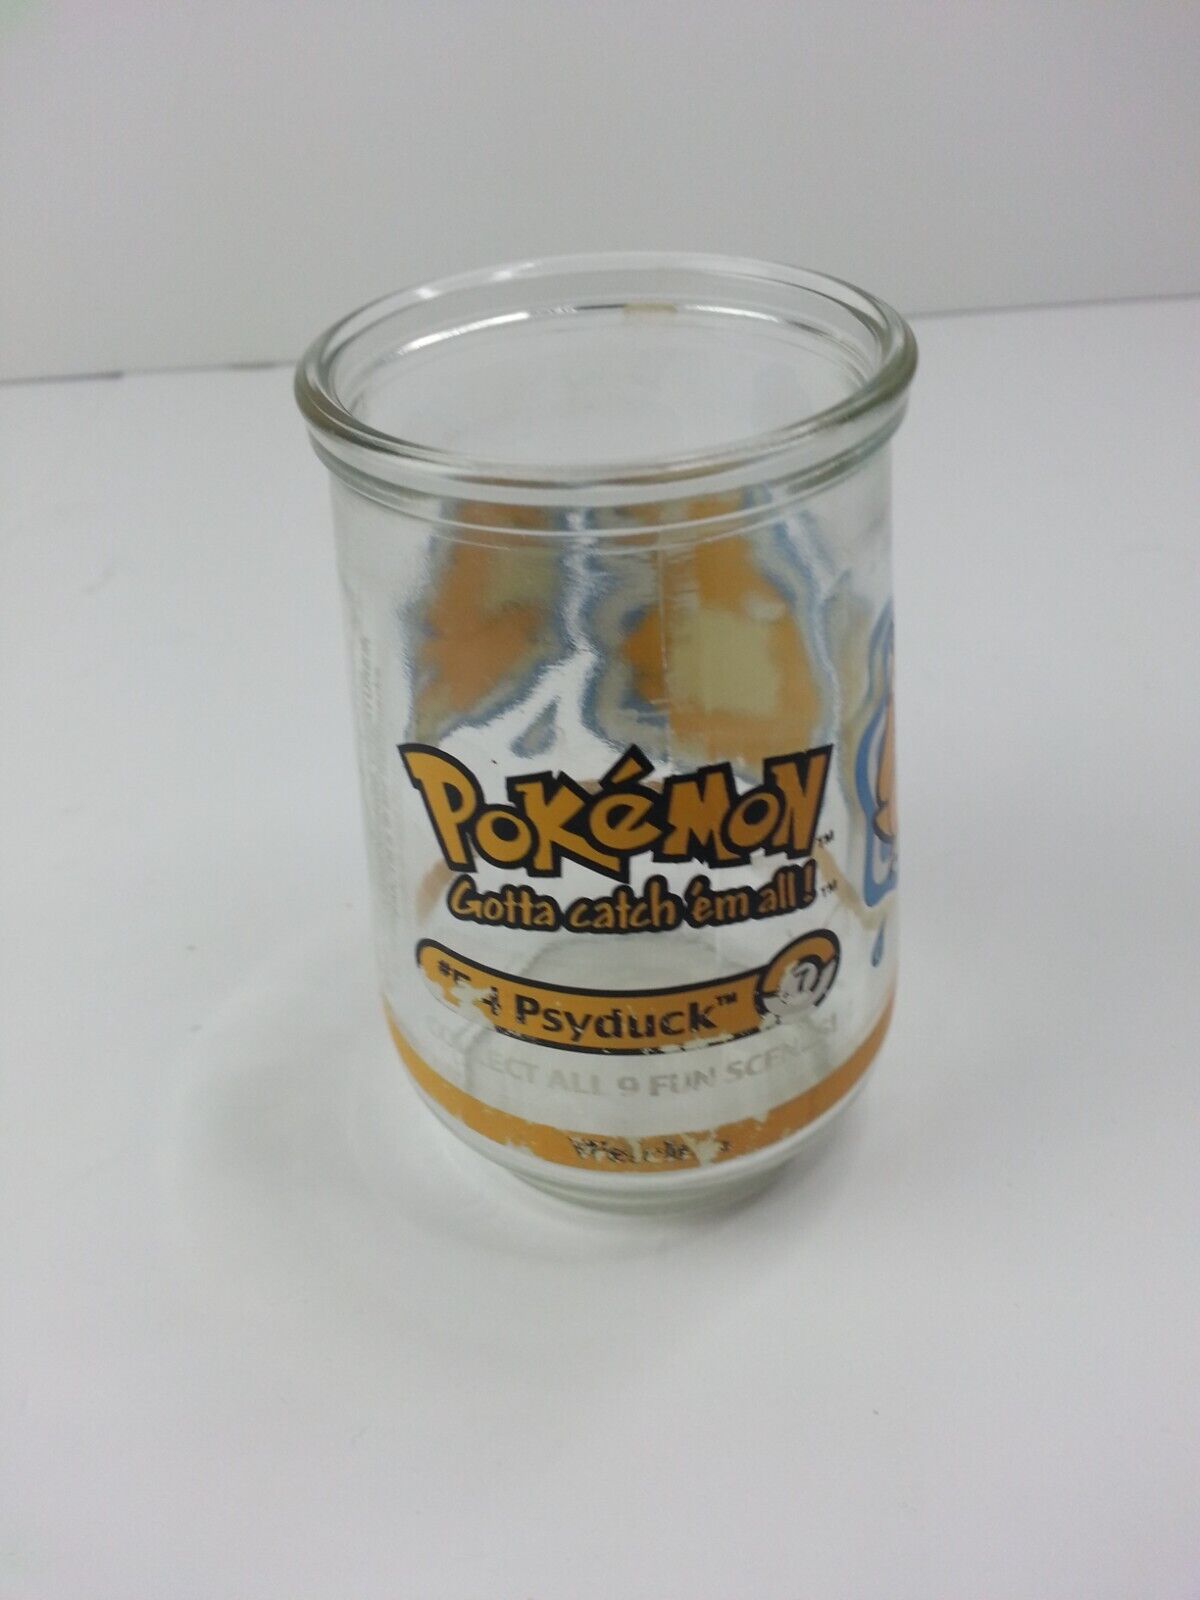 Pokemon Psyduck Welch’s Jelly Jar Glass 1999 Nintendo Collectible Cup